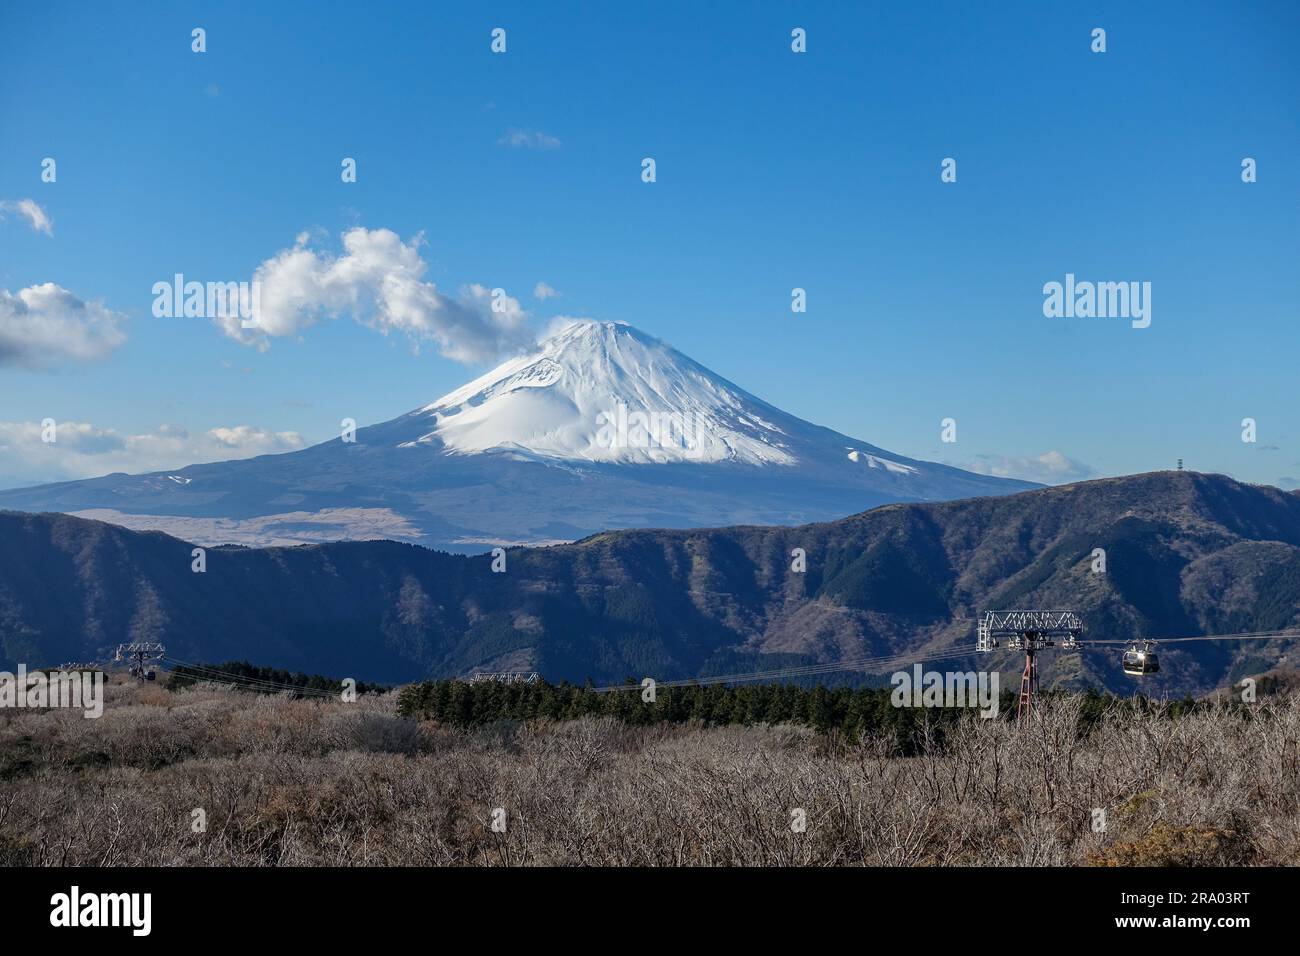 Snow-capped cone-shaped Mount Fuji and the Owakudani cablecar seen from Hakone, Japan, in December Stock Photo